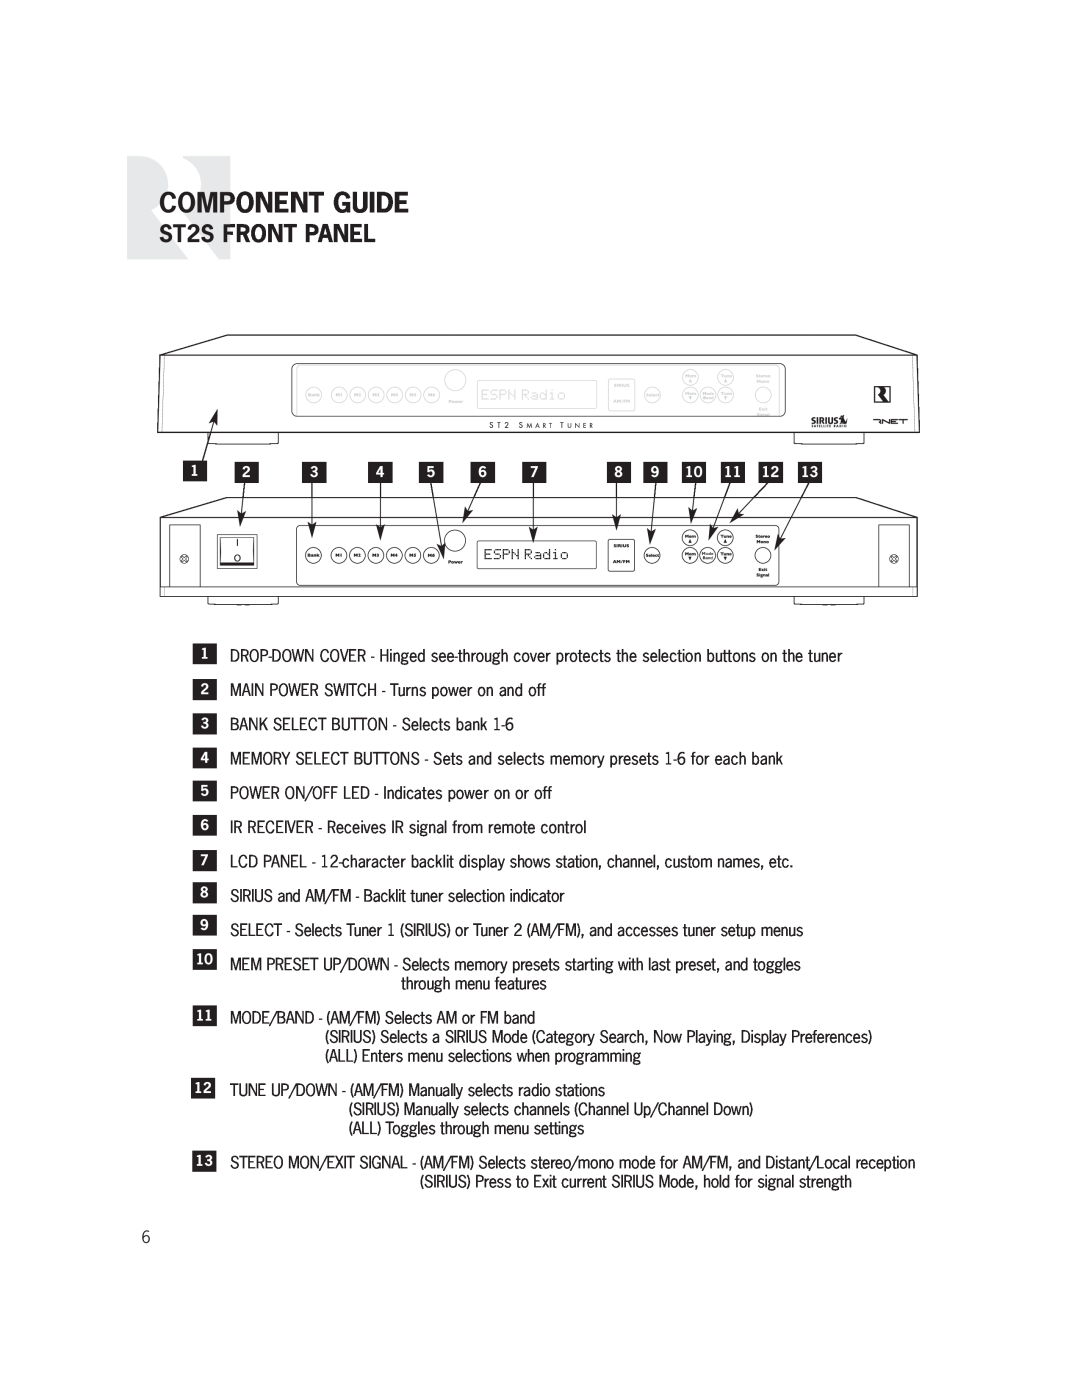 Russound installation manual Component Guide, ST2S FRONT PANEL 